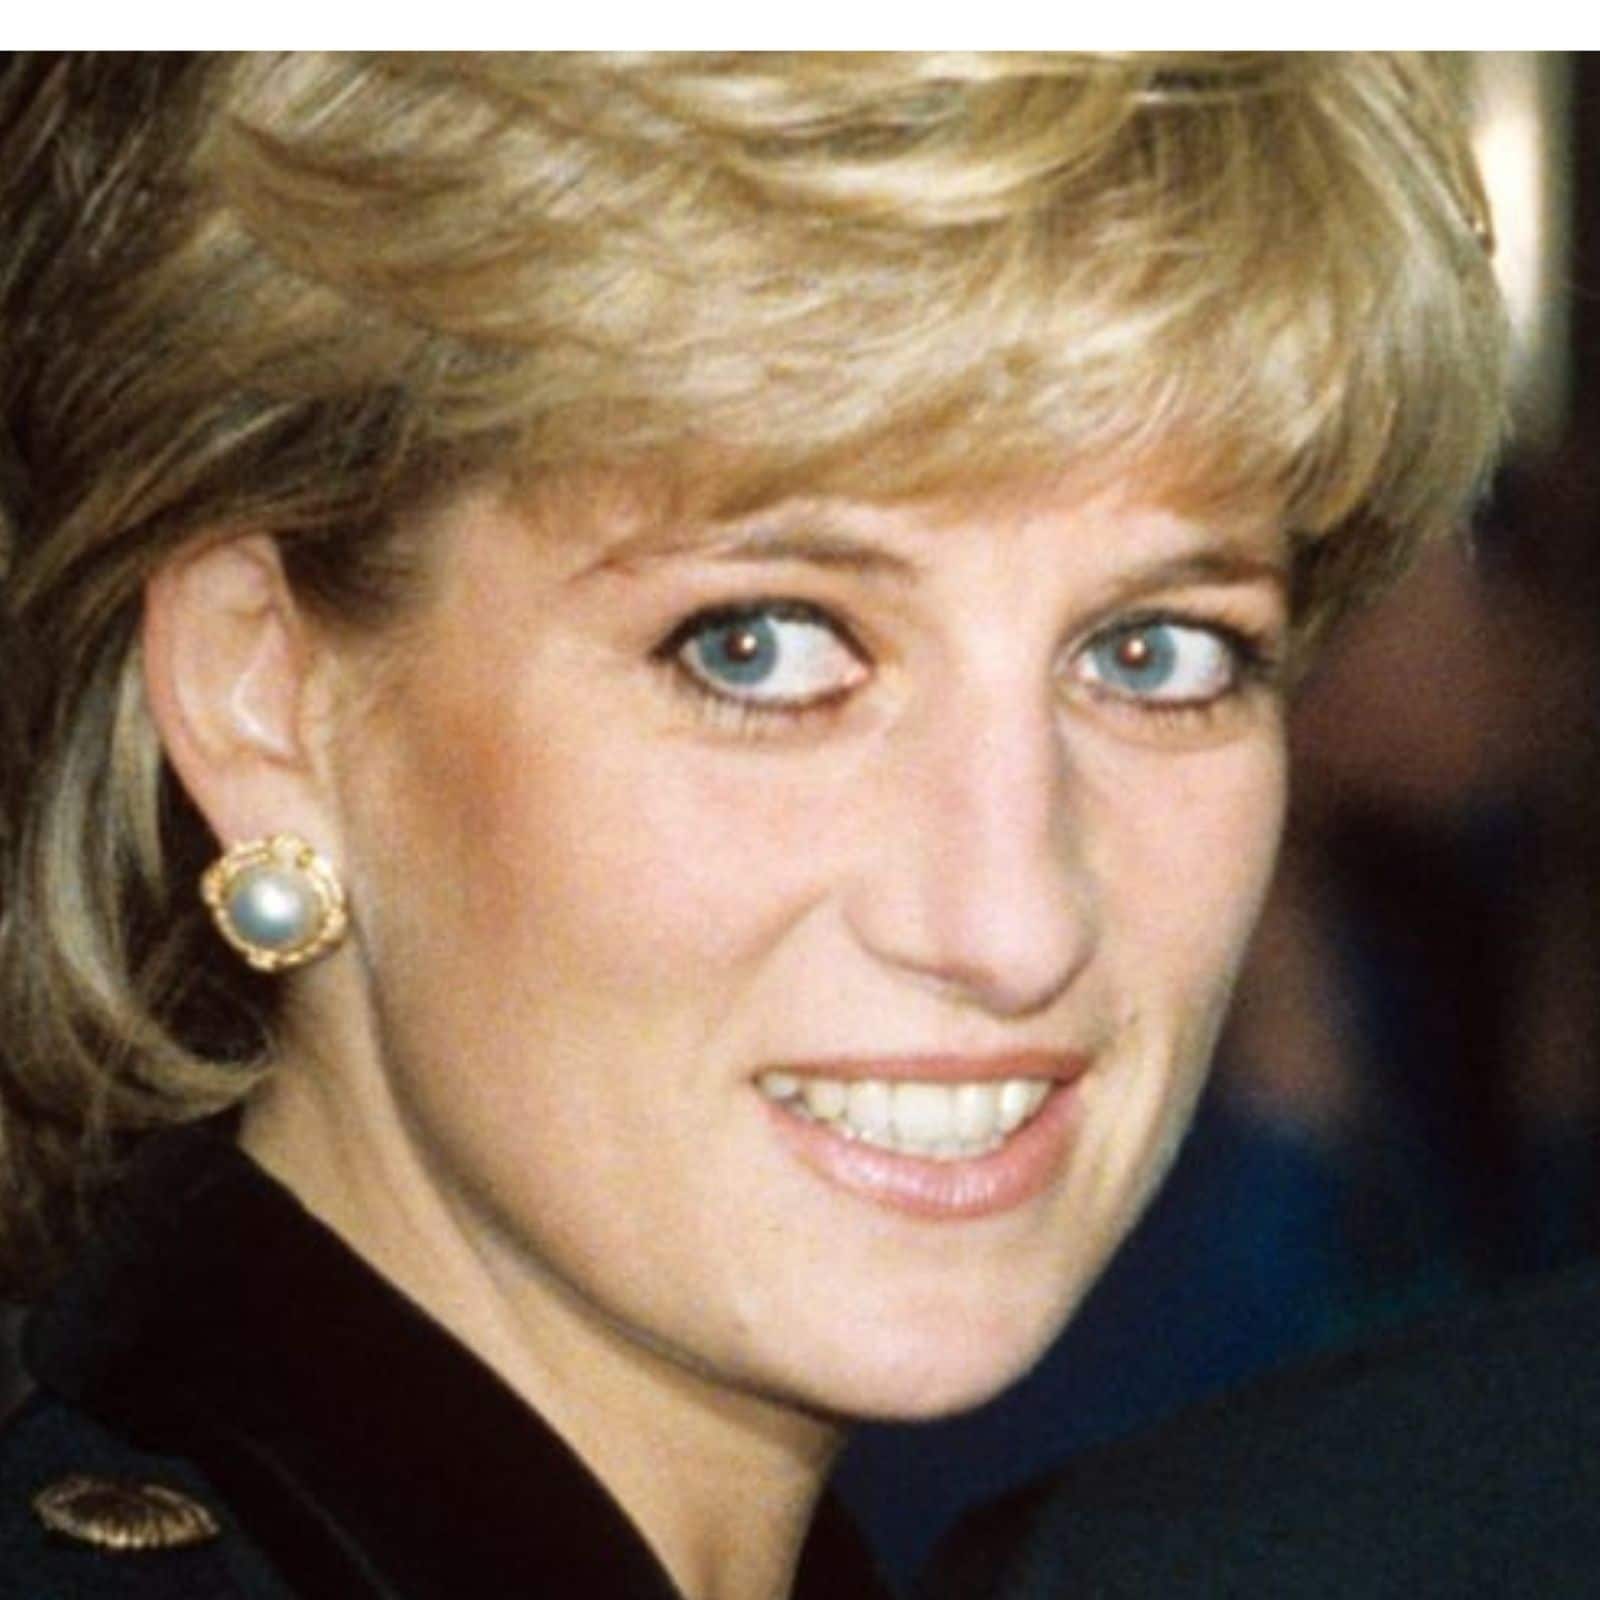 On This Day in 1997: 'People's Princess' Diana Killed in Paris Car Crash